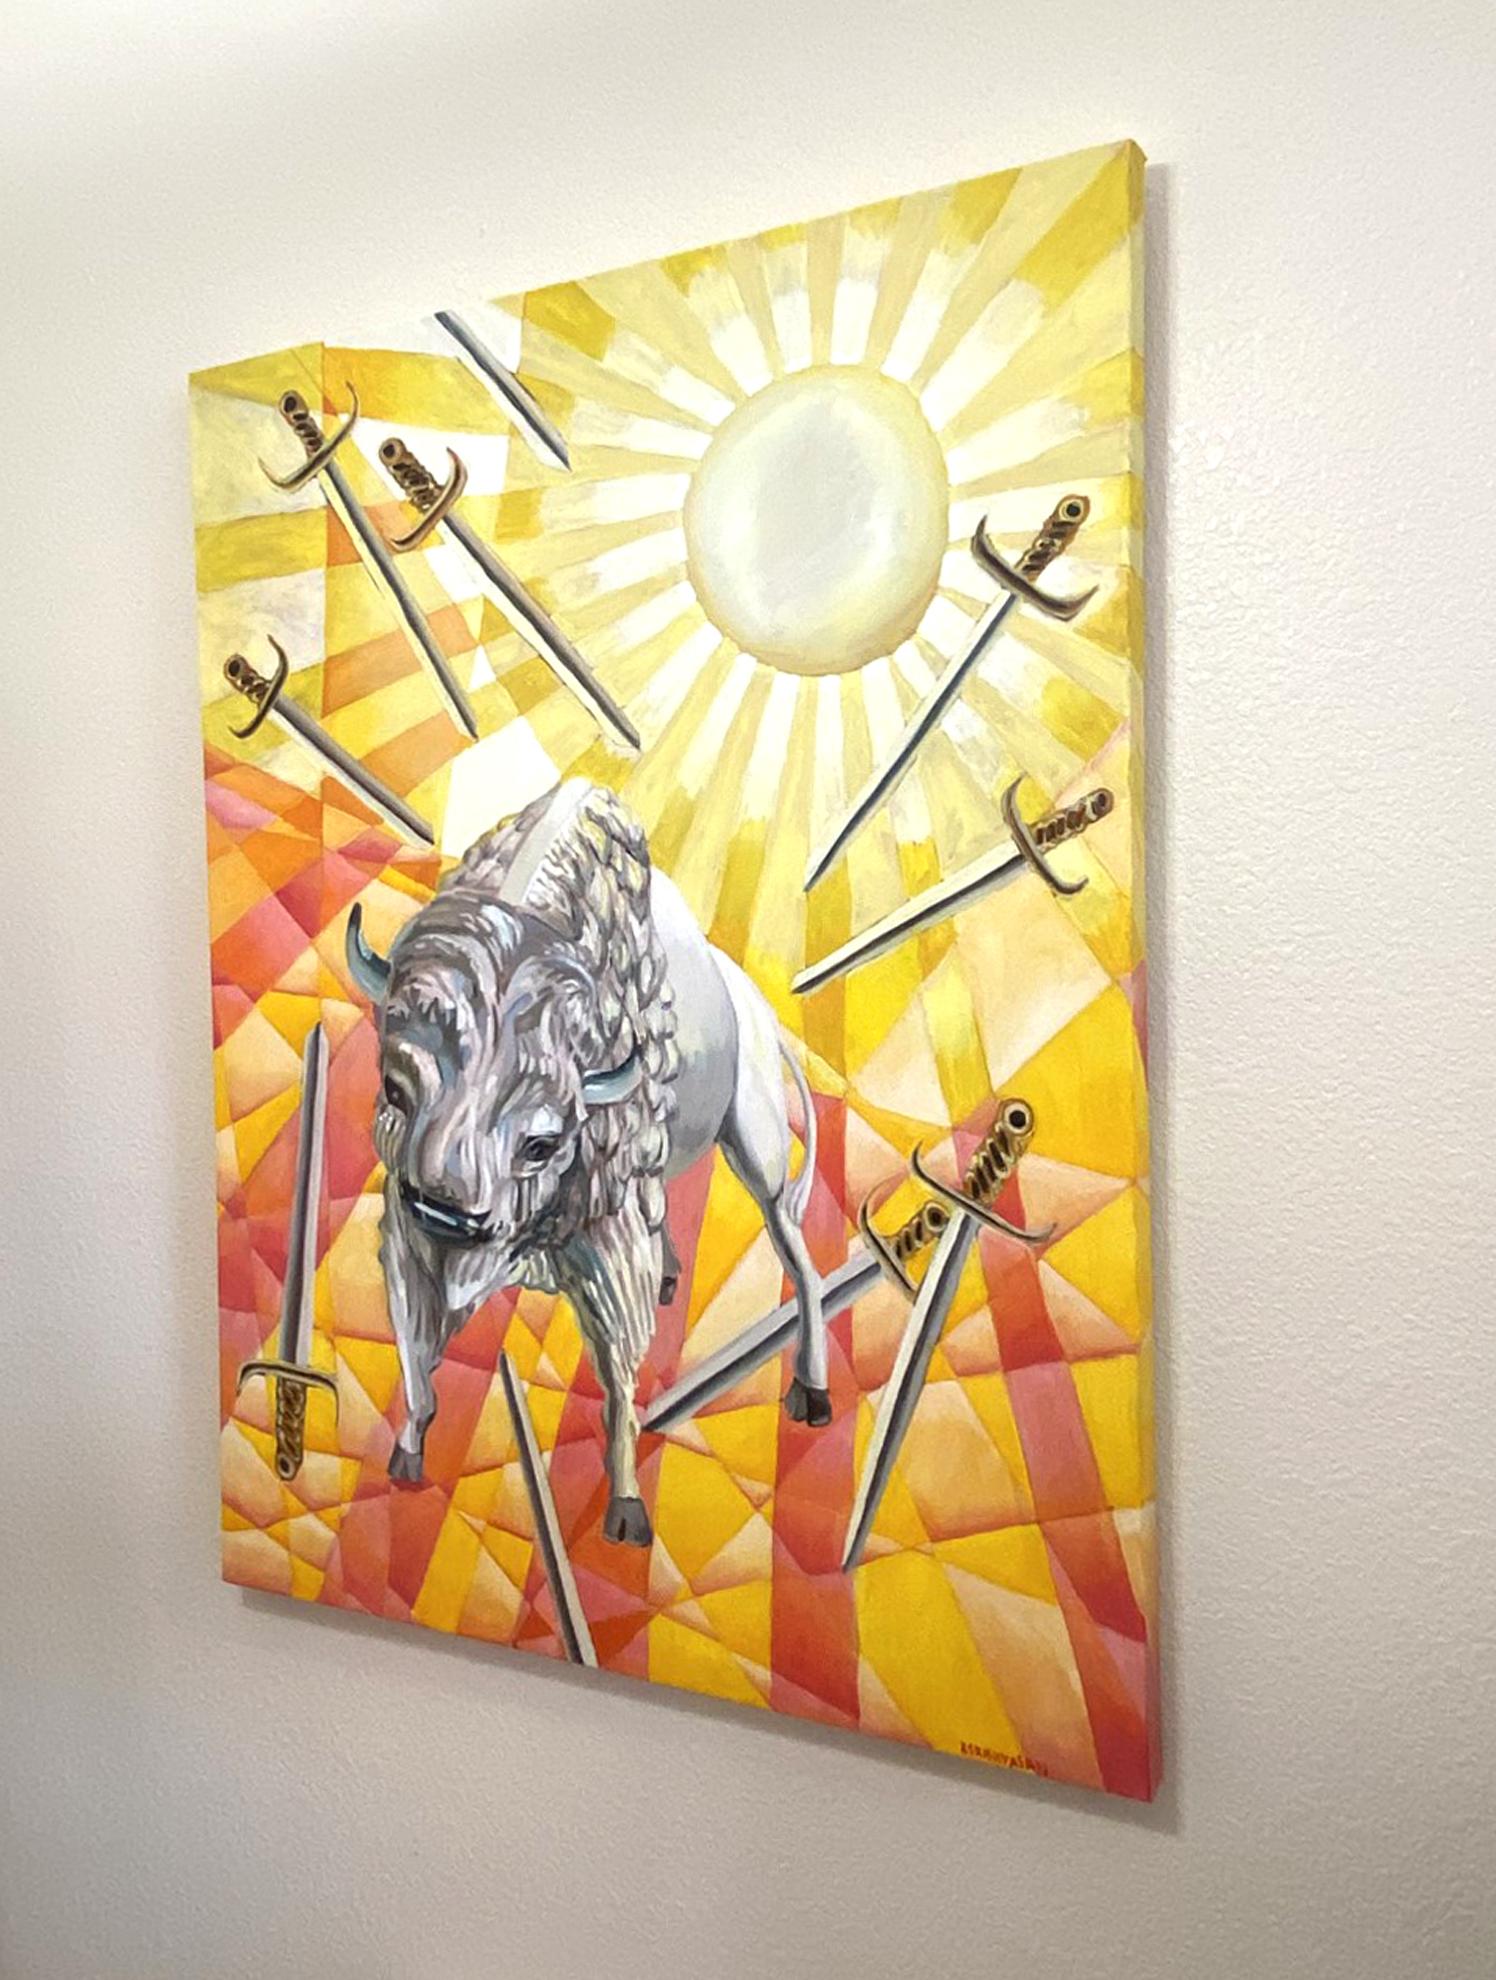 <p>Artist Comments<br />Artist Rachel Srinivasan presents a surreal image of a white bison standing in the middle of 10 swordsâ€”nominative to its corresponding card from the tarot deck. The creature appears bright and powerful despite depicting the